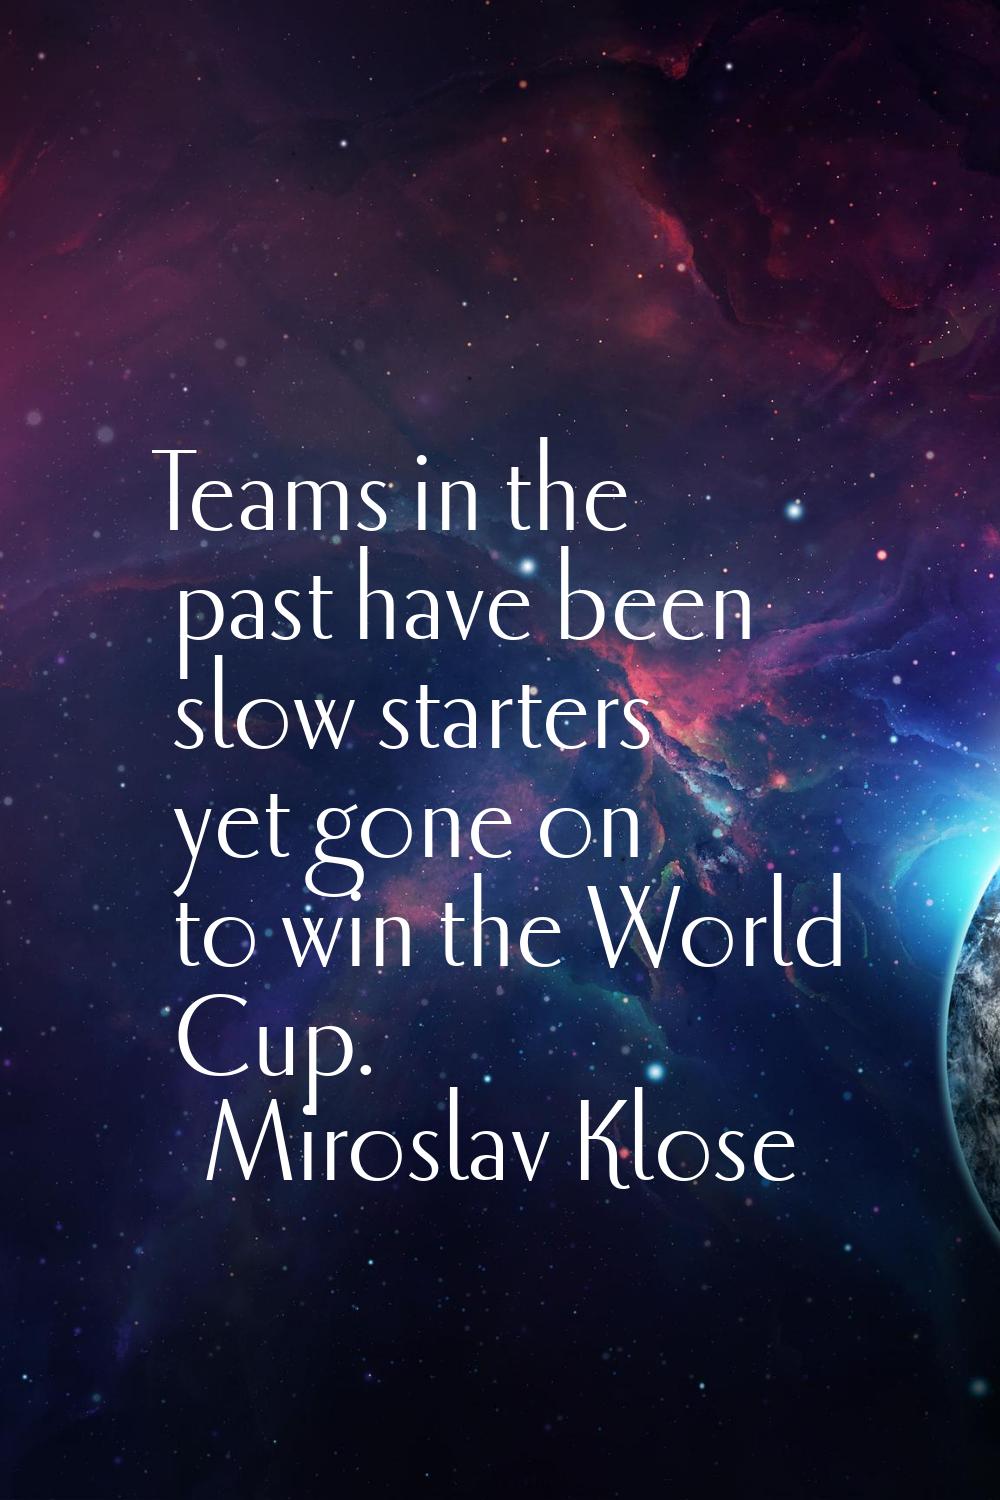 Teams in the past have been slow starters yet gone on to win the World Cup.